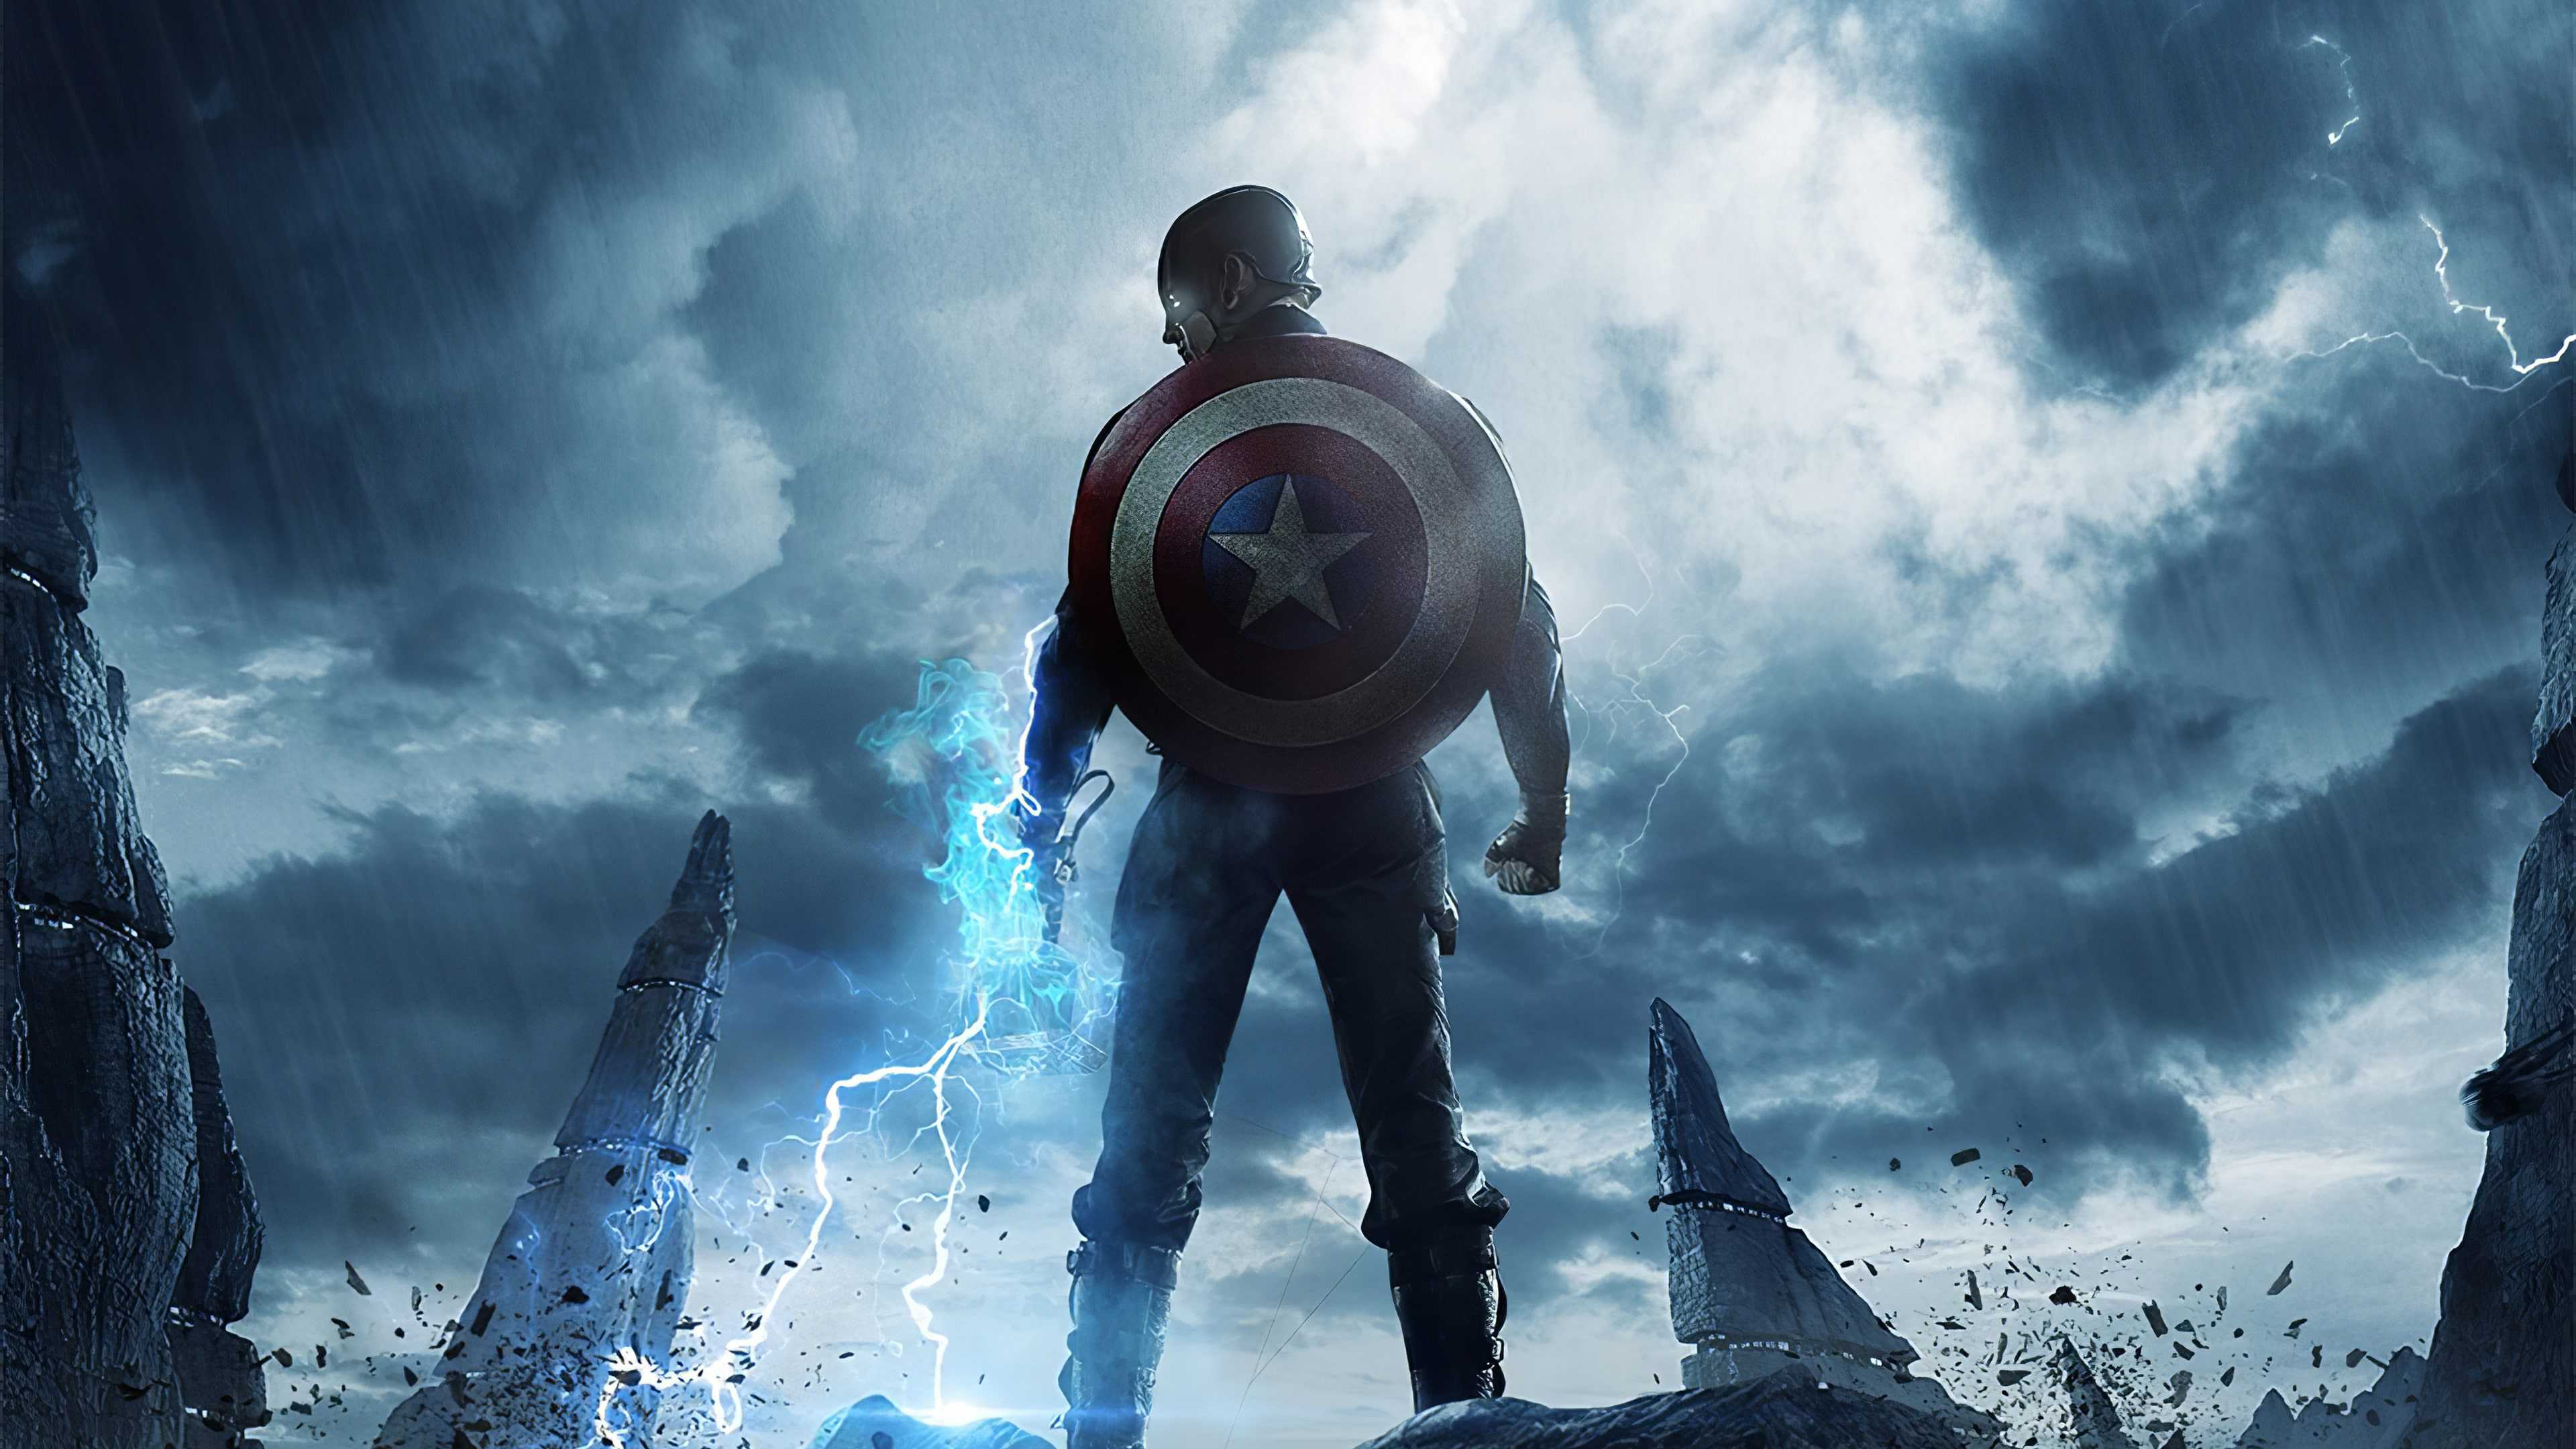 HD image of Captain America looking ahead of him